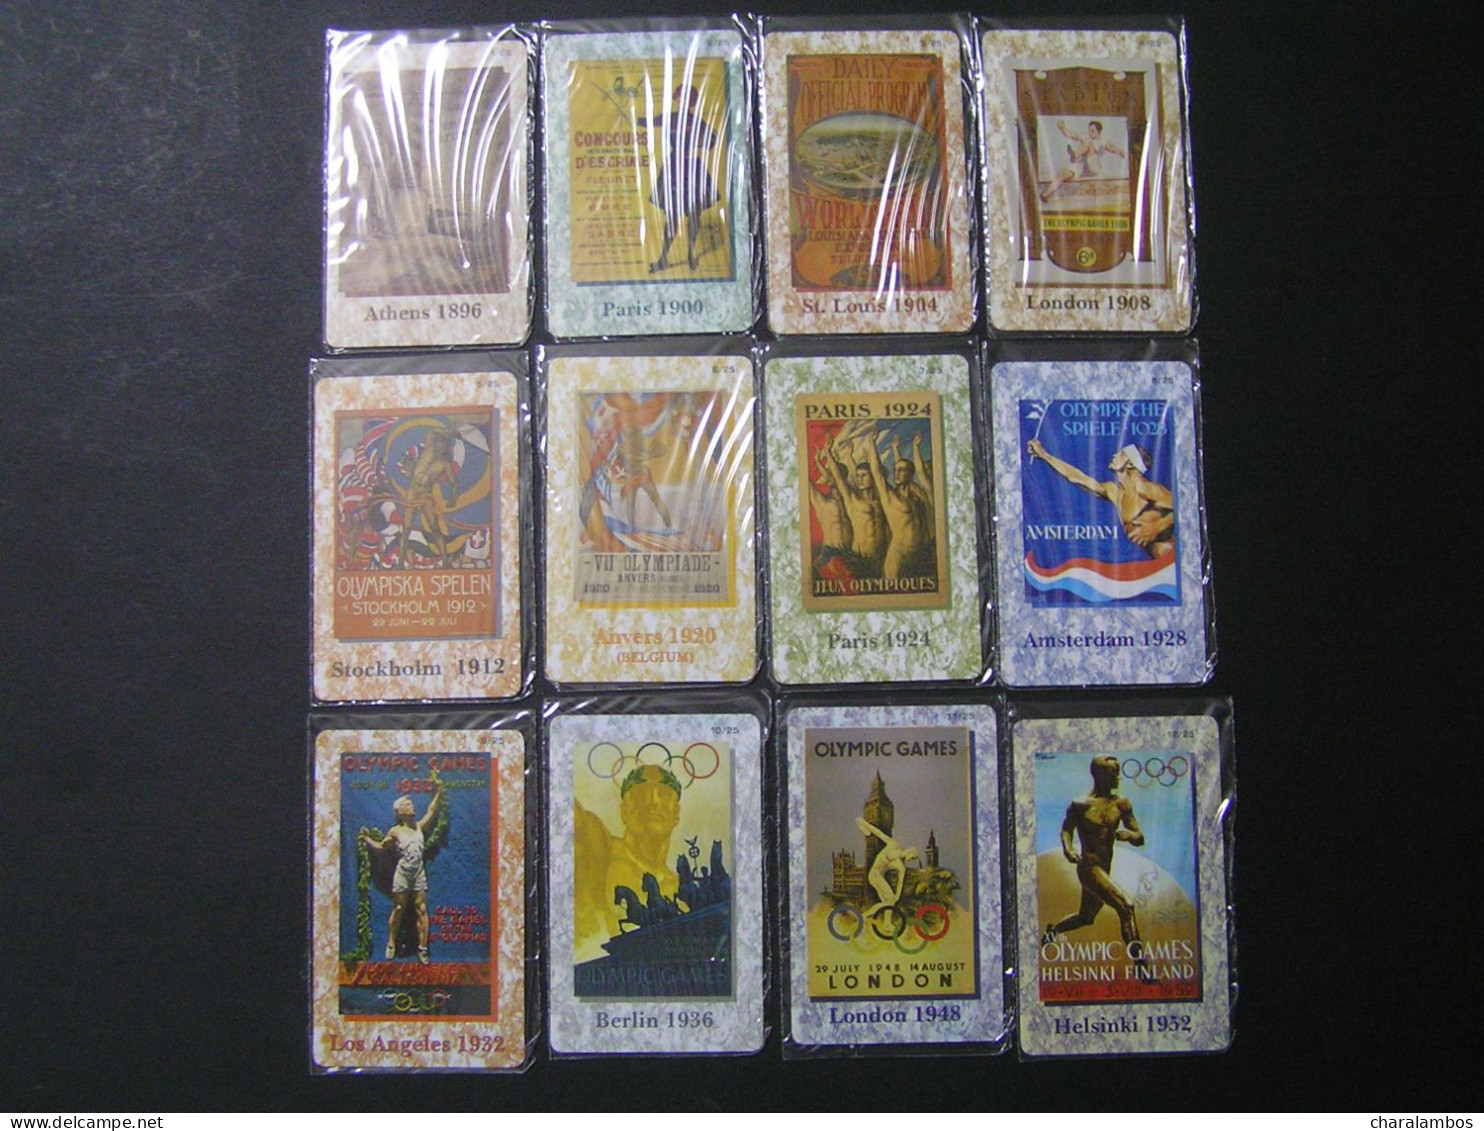 GREECE OLYMPIADS 1896-2004 25 Collectors Telephone Cards DVD ANCIENT OLYMPIA Birthplace Of The Olympic Games Folder Mind - Jeux Olympiques